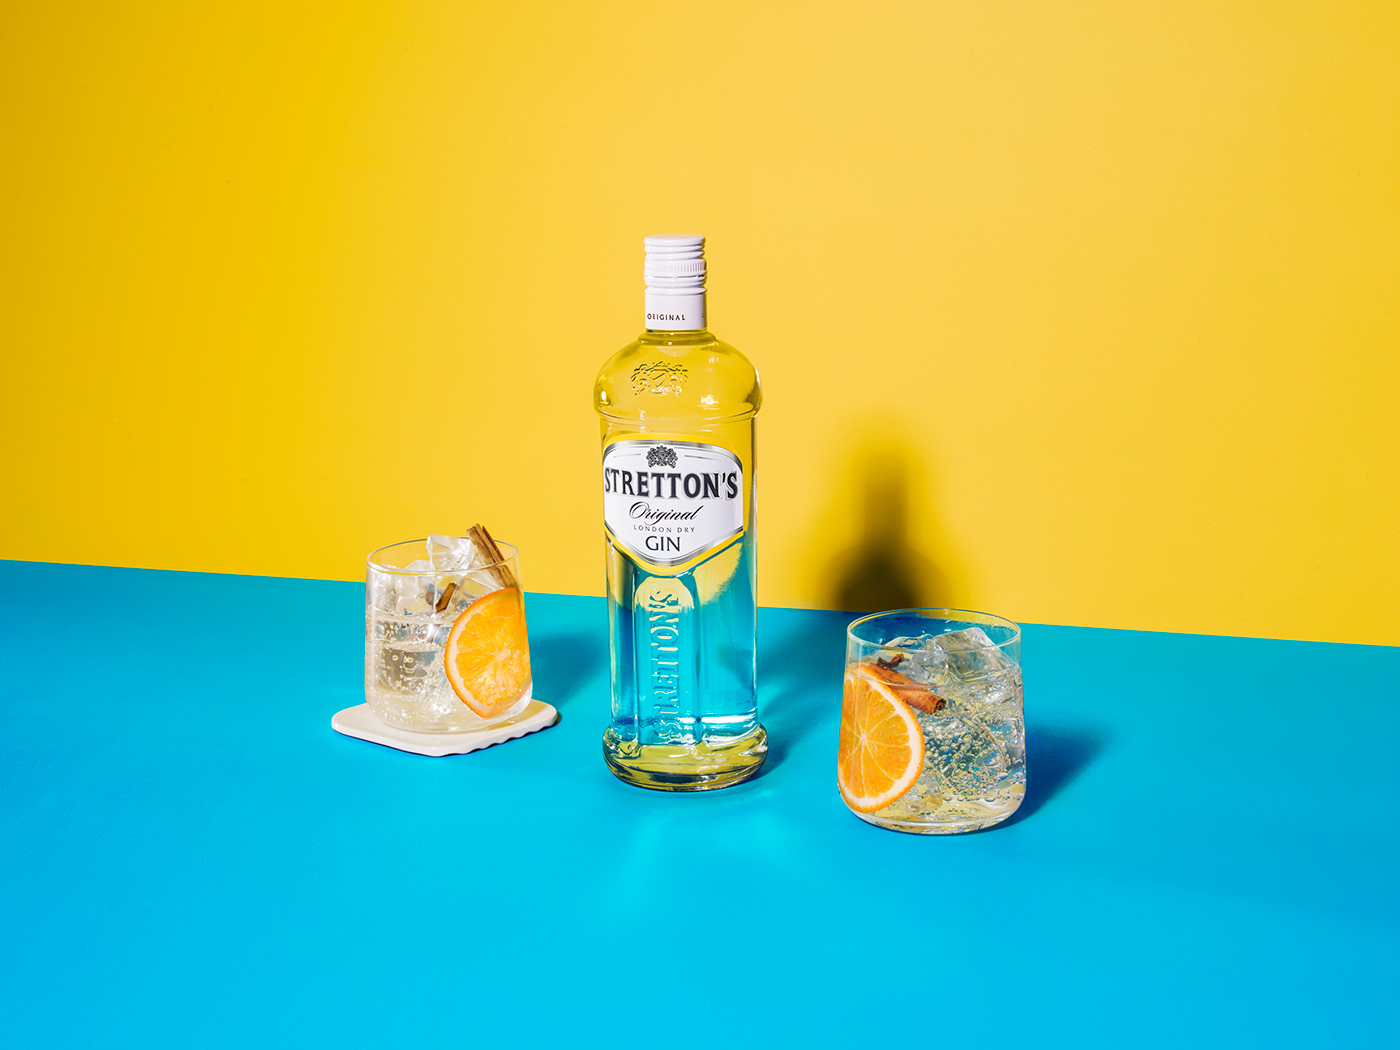 Advertising  brand brand identity drink gin Packaging product Product Photography south africa visual identity